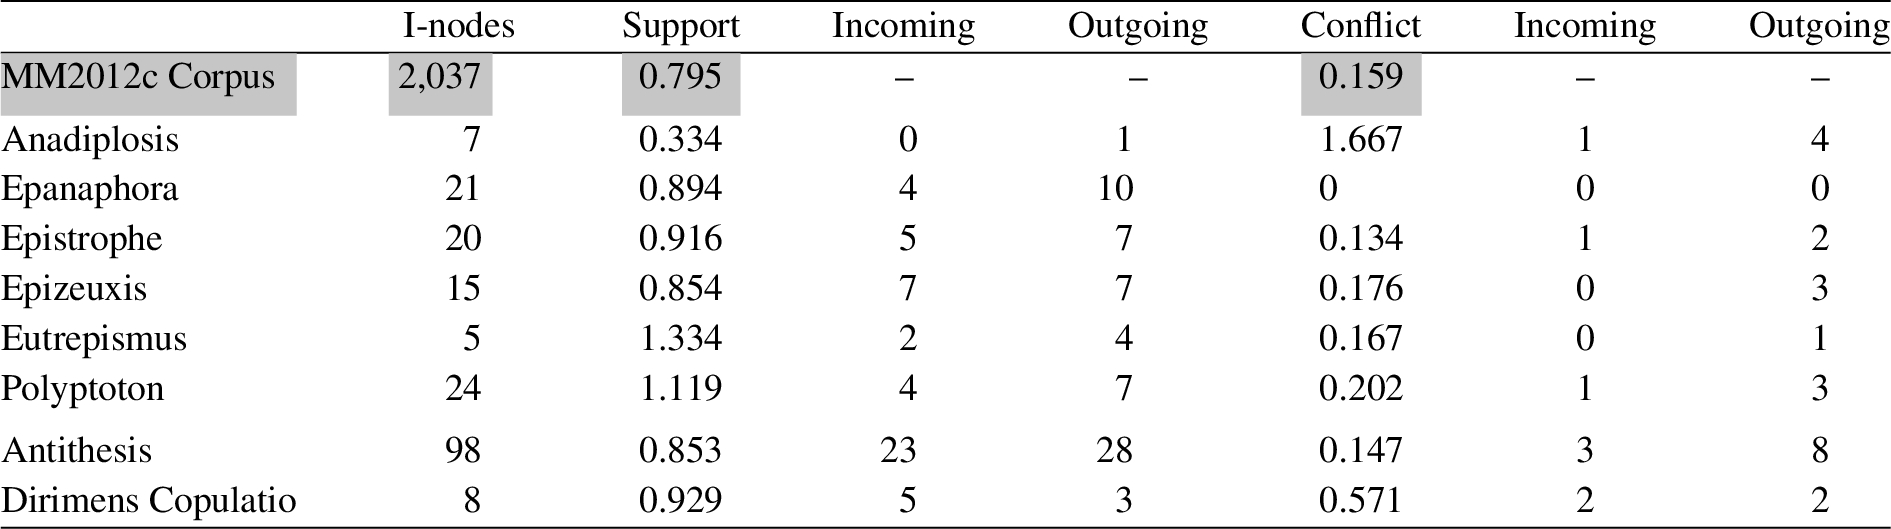 The connection between rhetorical figures and argument structure, in terms of average number of support and conflict relations, and counts of incoming and outgoing relations